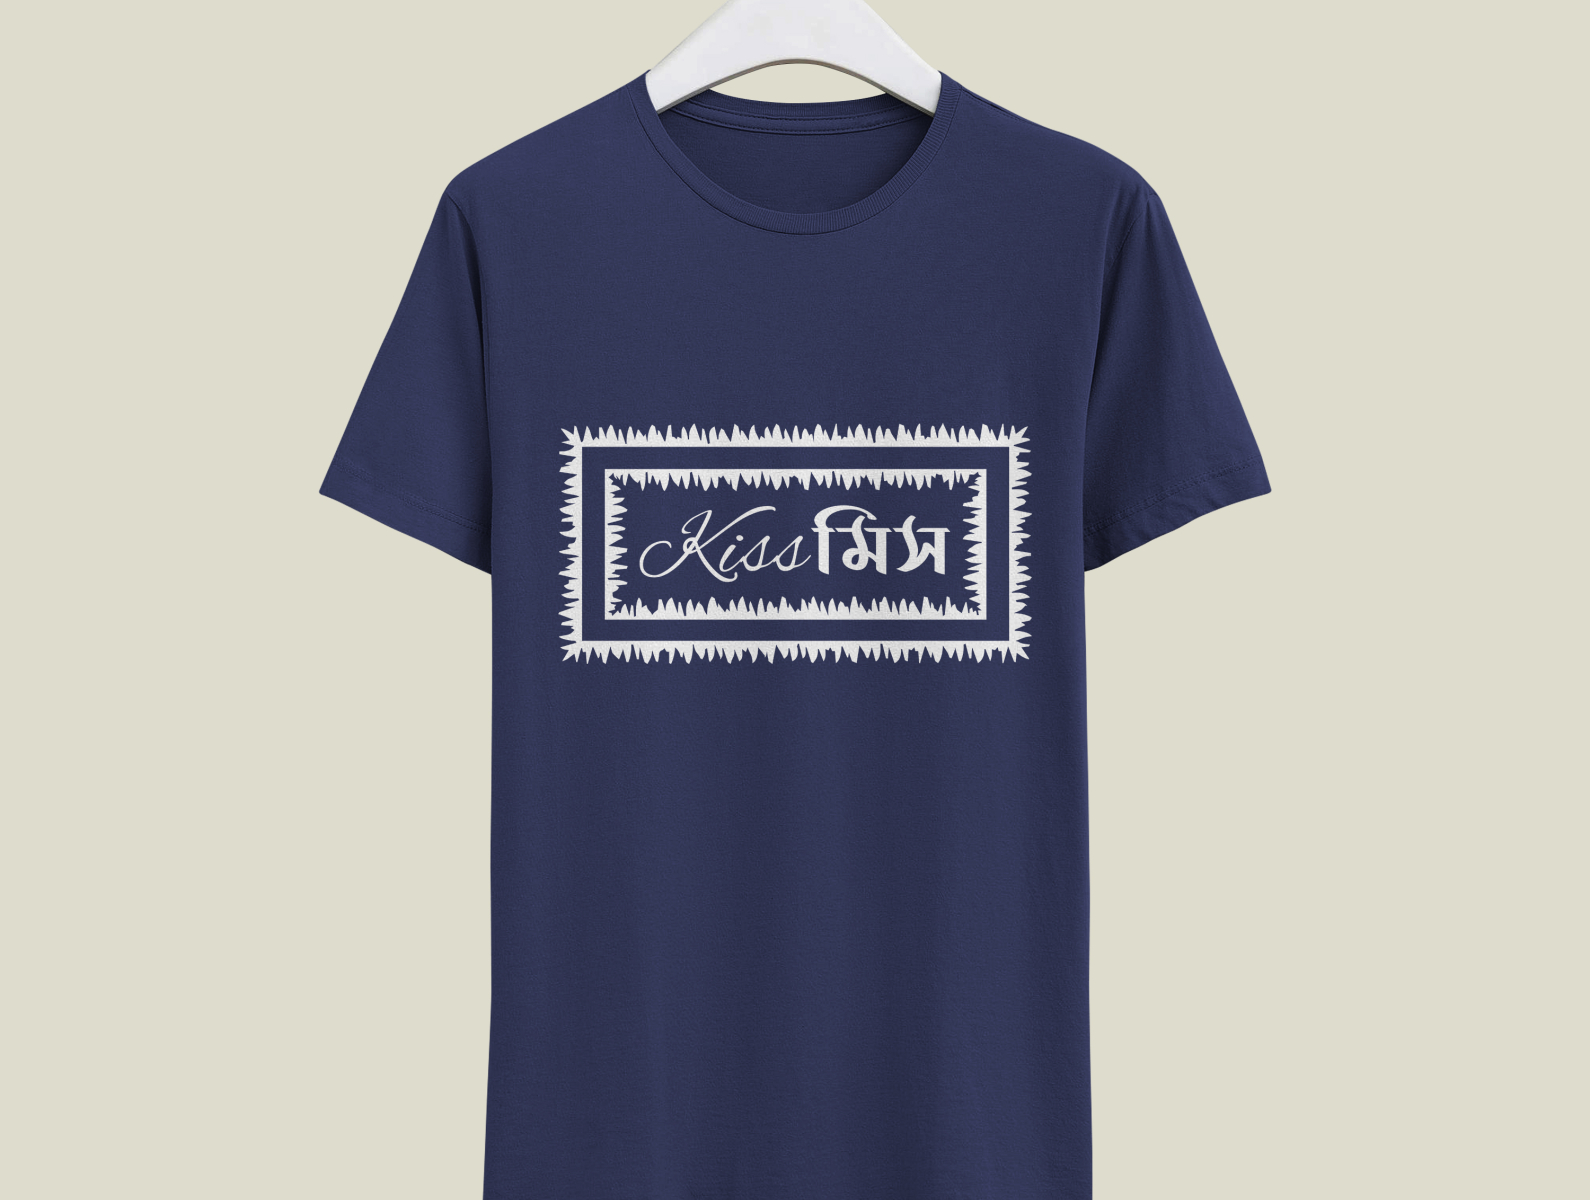 T shirt Front by Surjo Arts on Dribbble